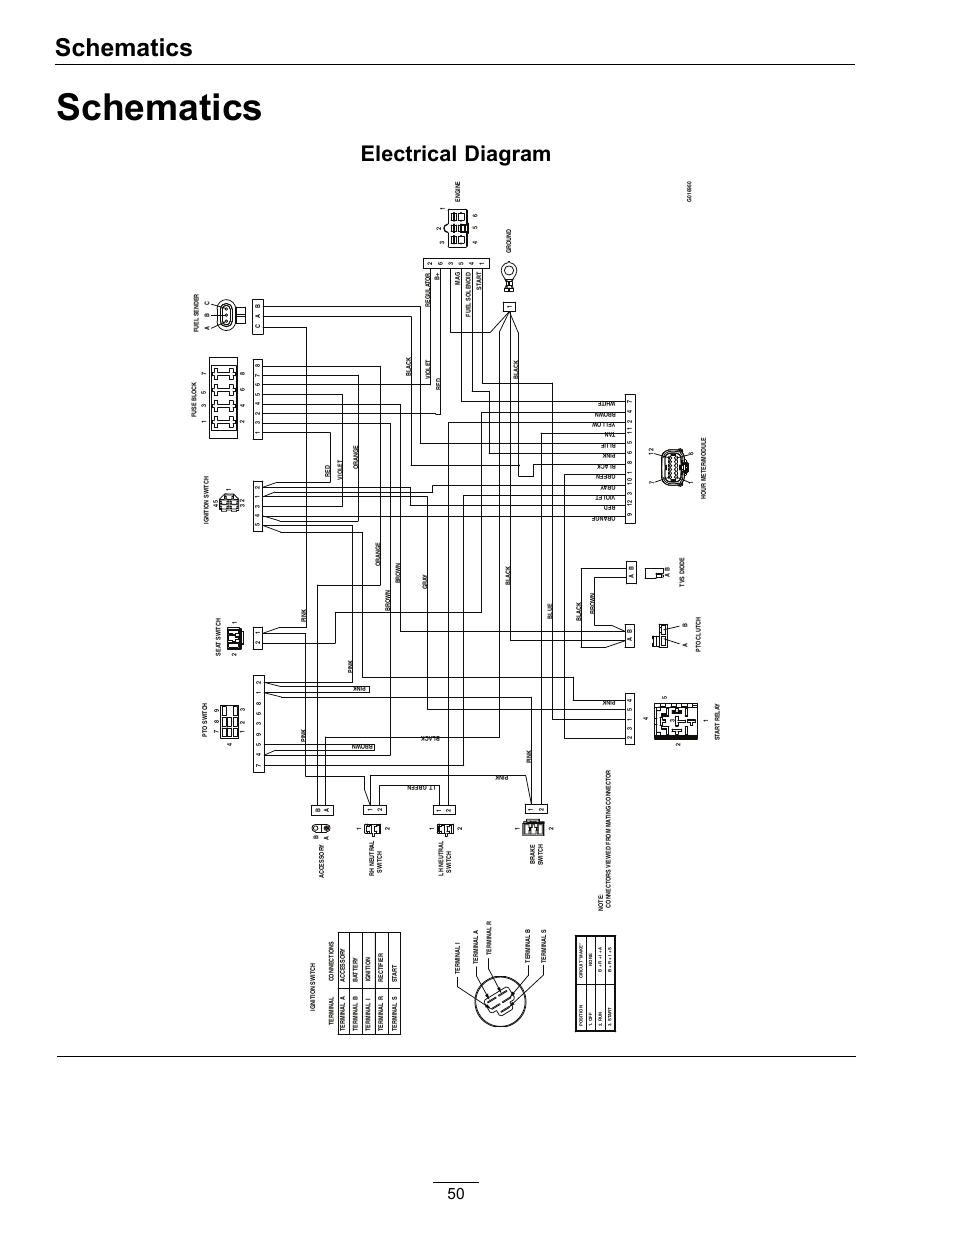 wiring diagram for ansul r-102